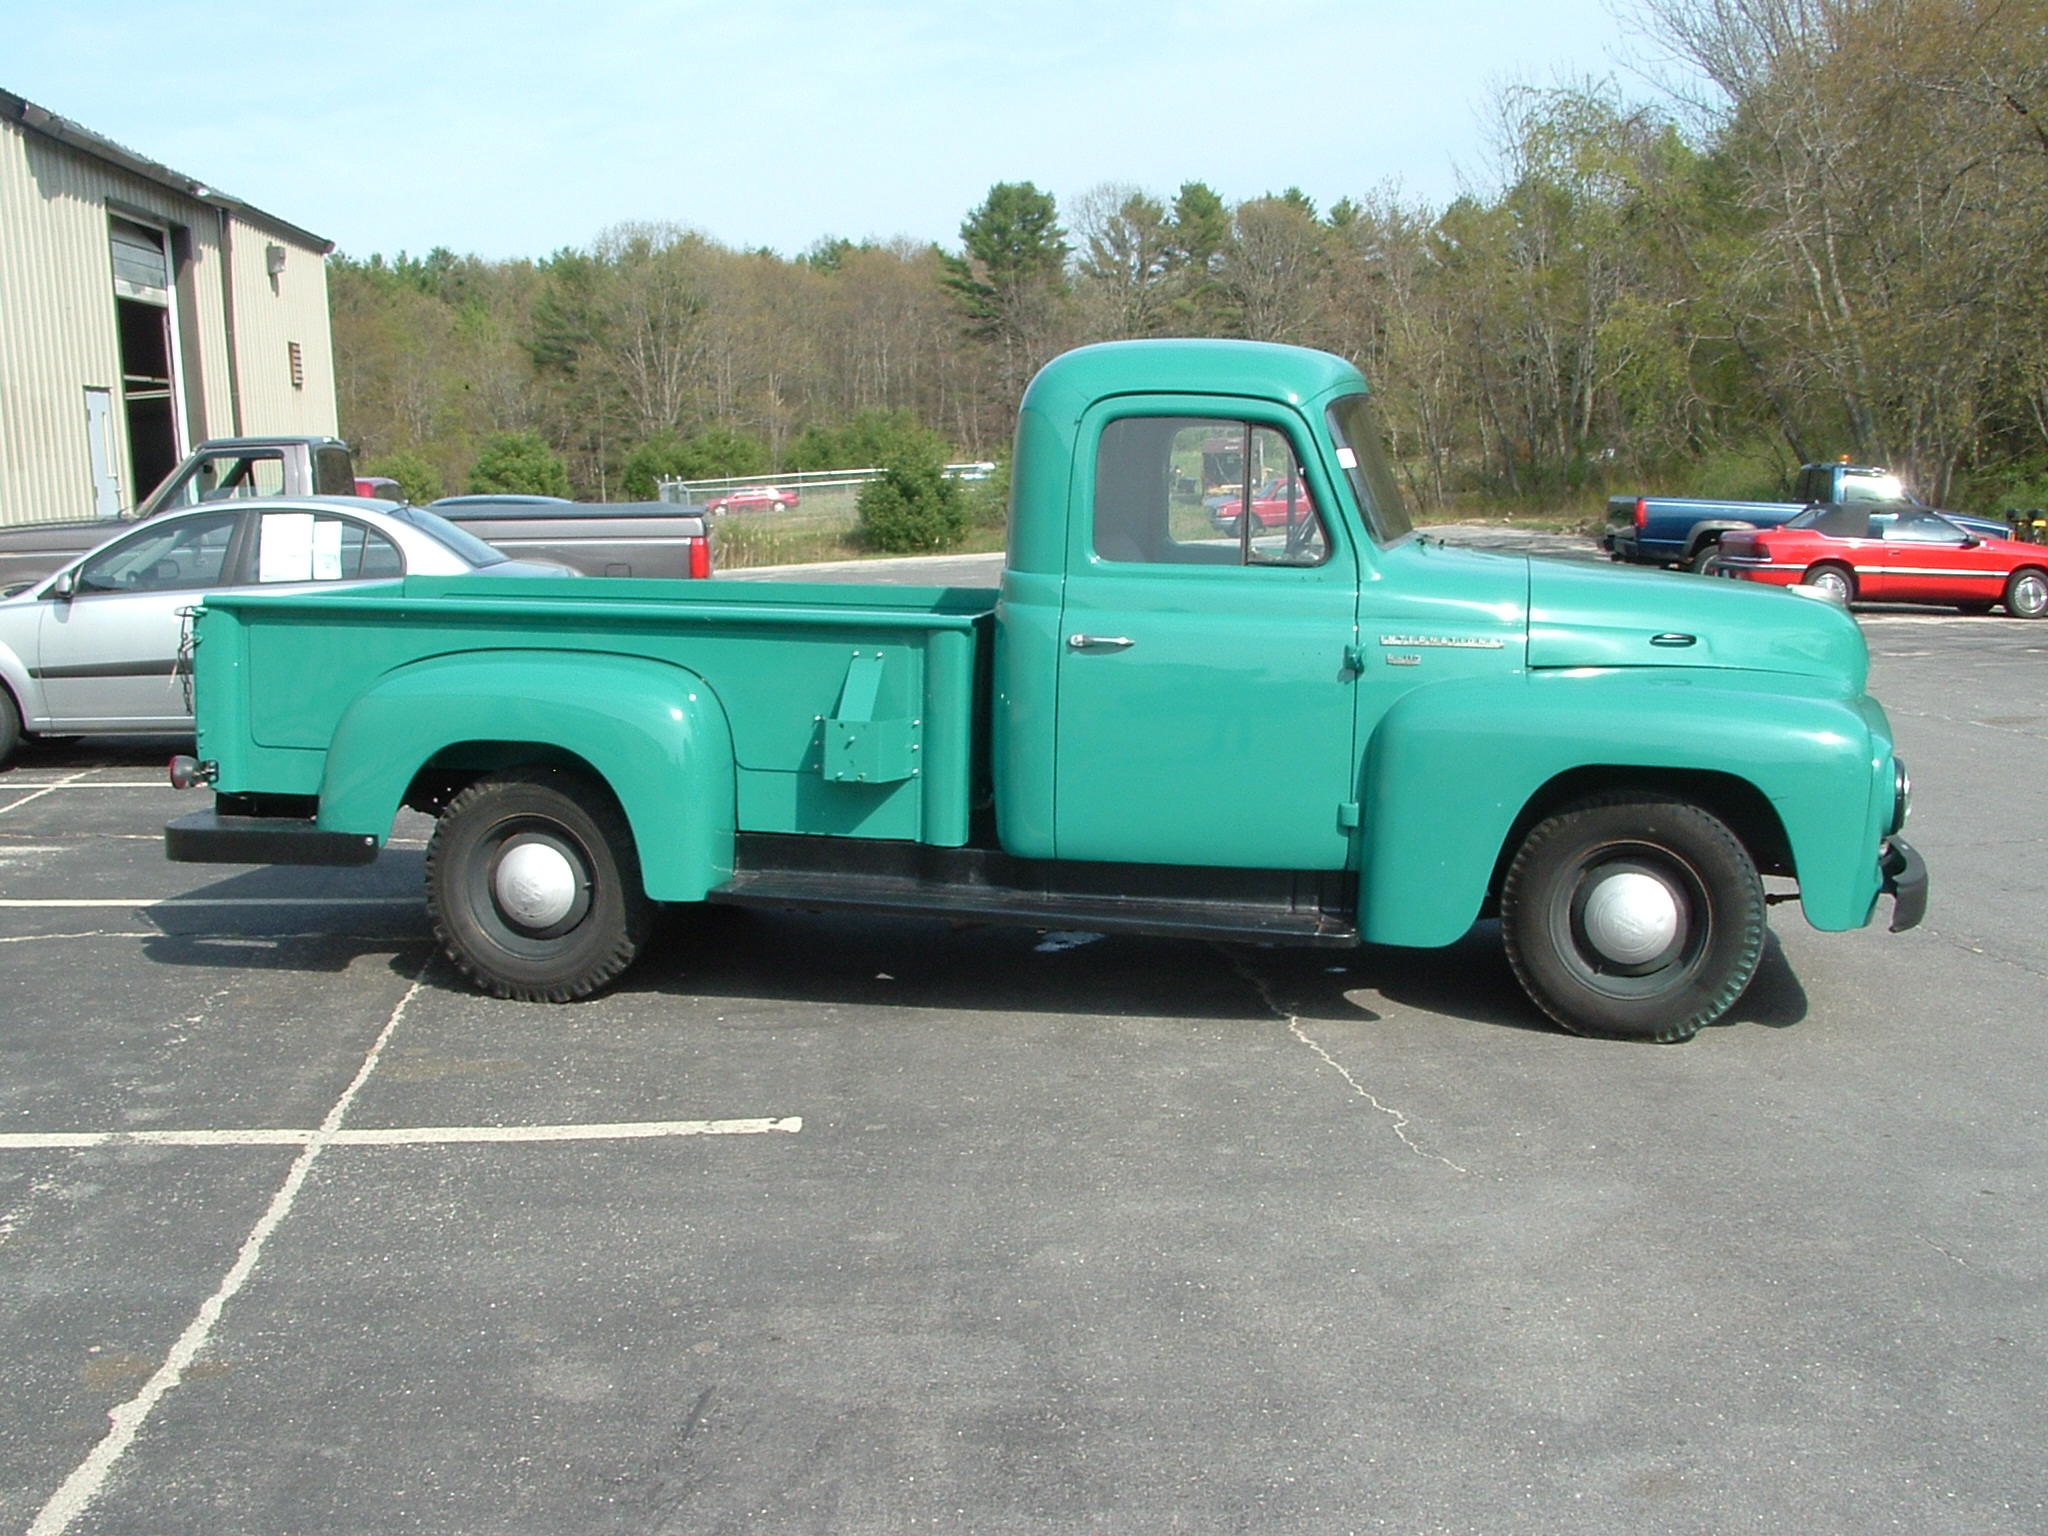 Lot 52 - 1950 International R110 Pickup Truck - Unreserved Classic Car Auction of the